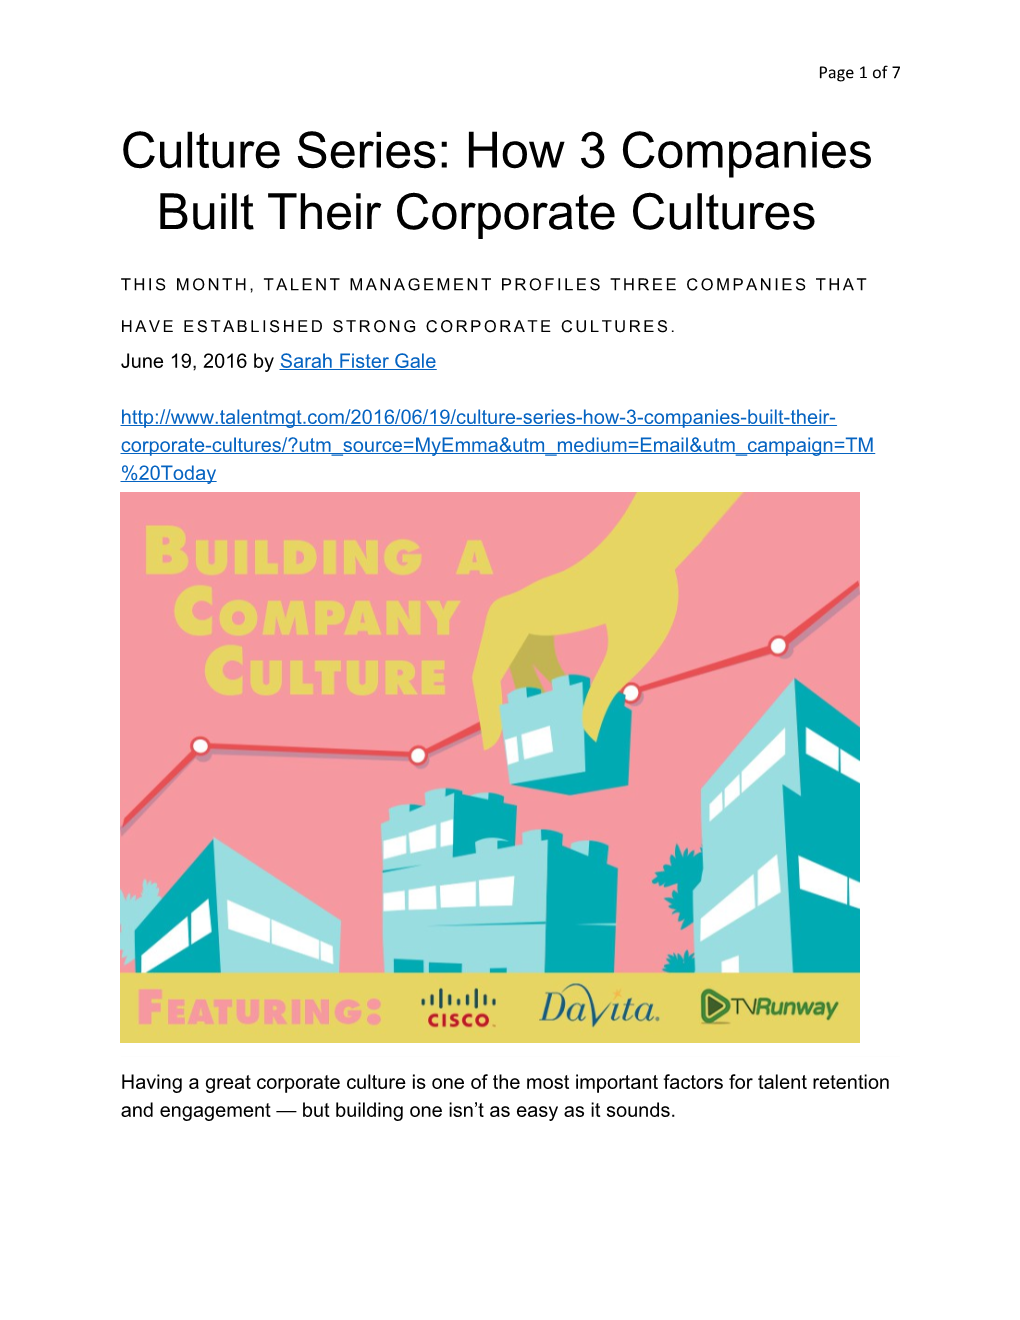 Culture Series: How 3 Companies Built Their Corporate Cultures